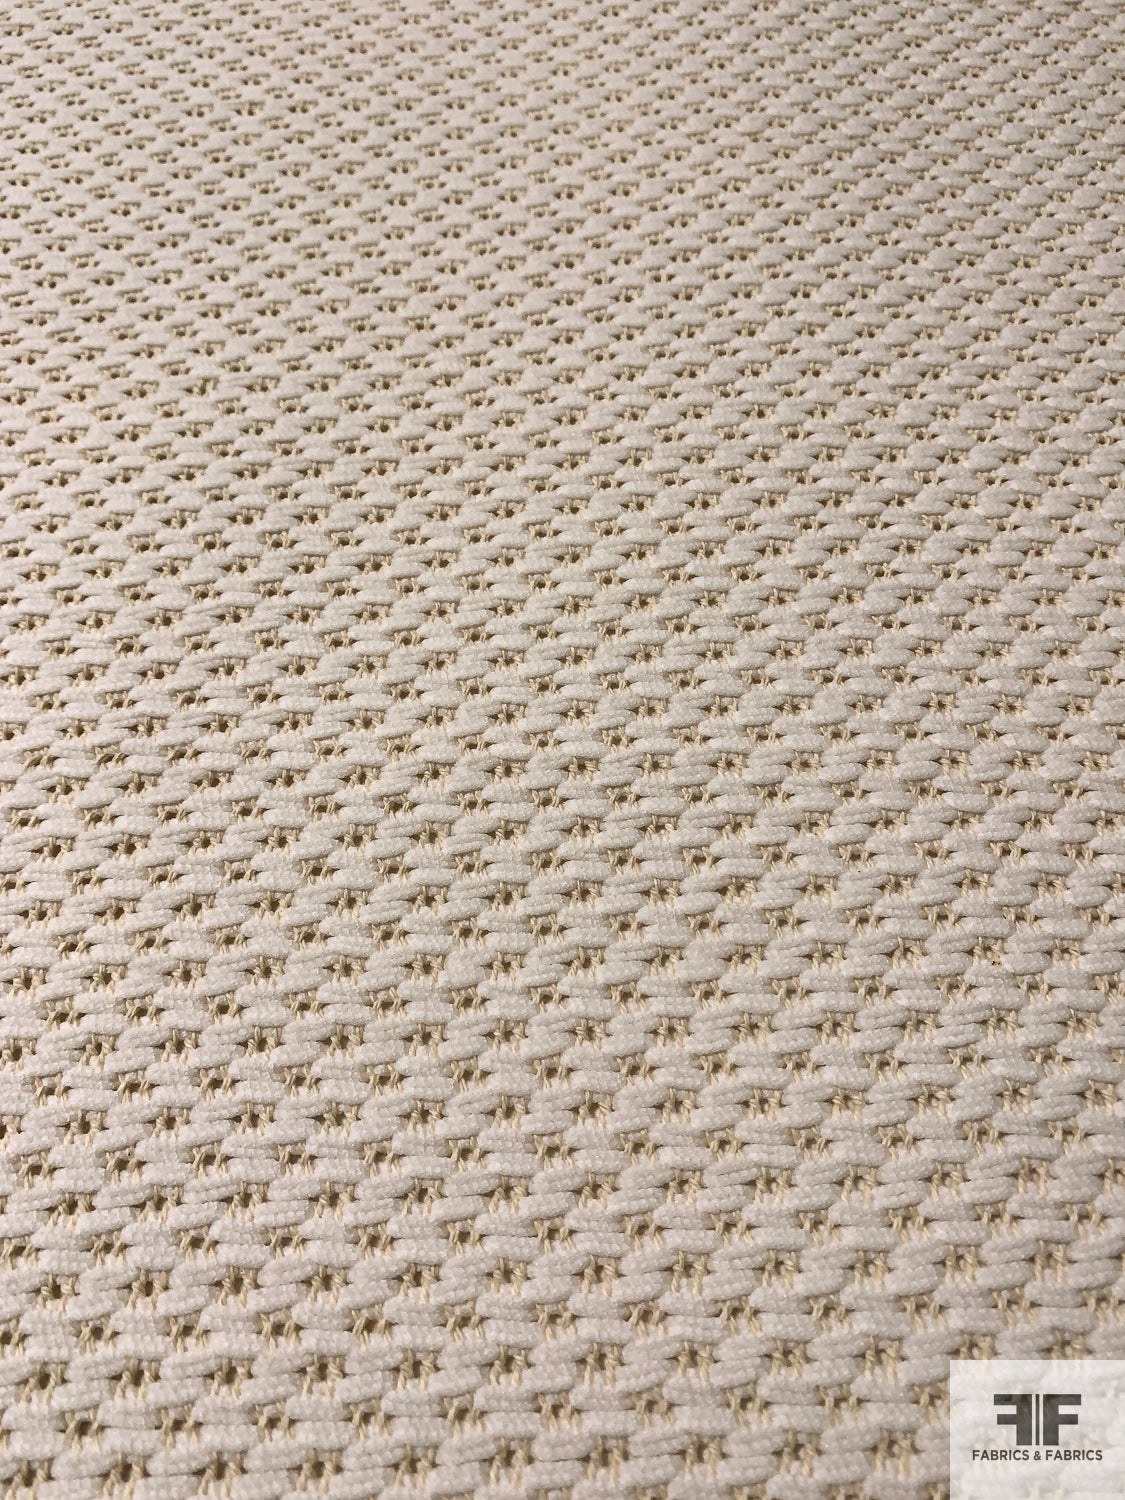 Italian Open Woven Cotton Blend Novelty Tweed with Stretch - White / Cream